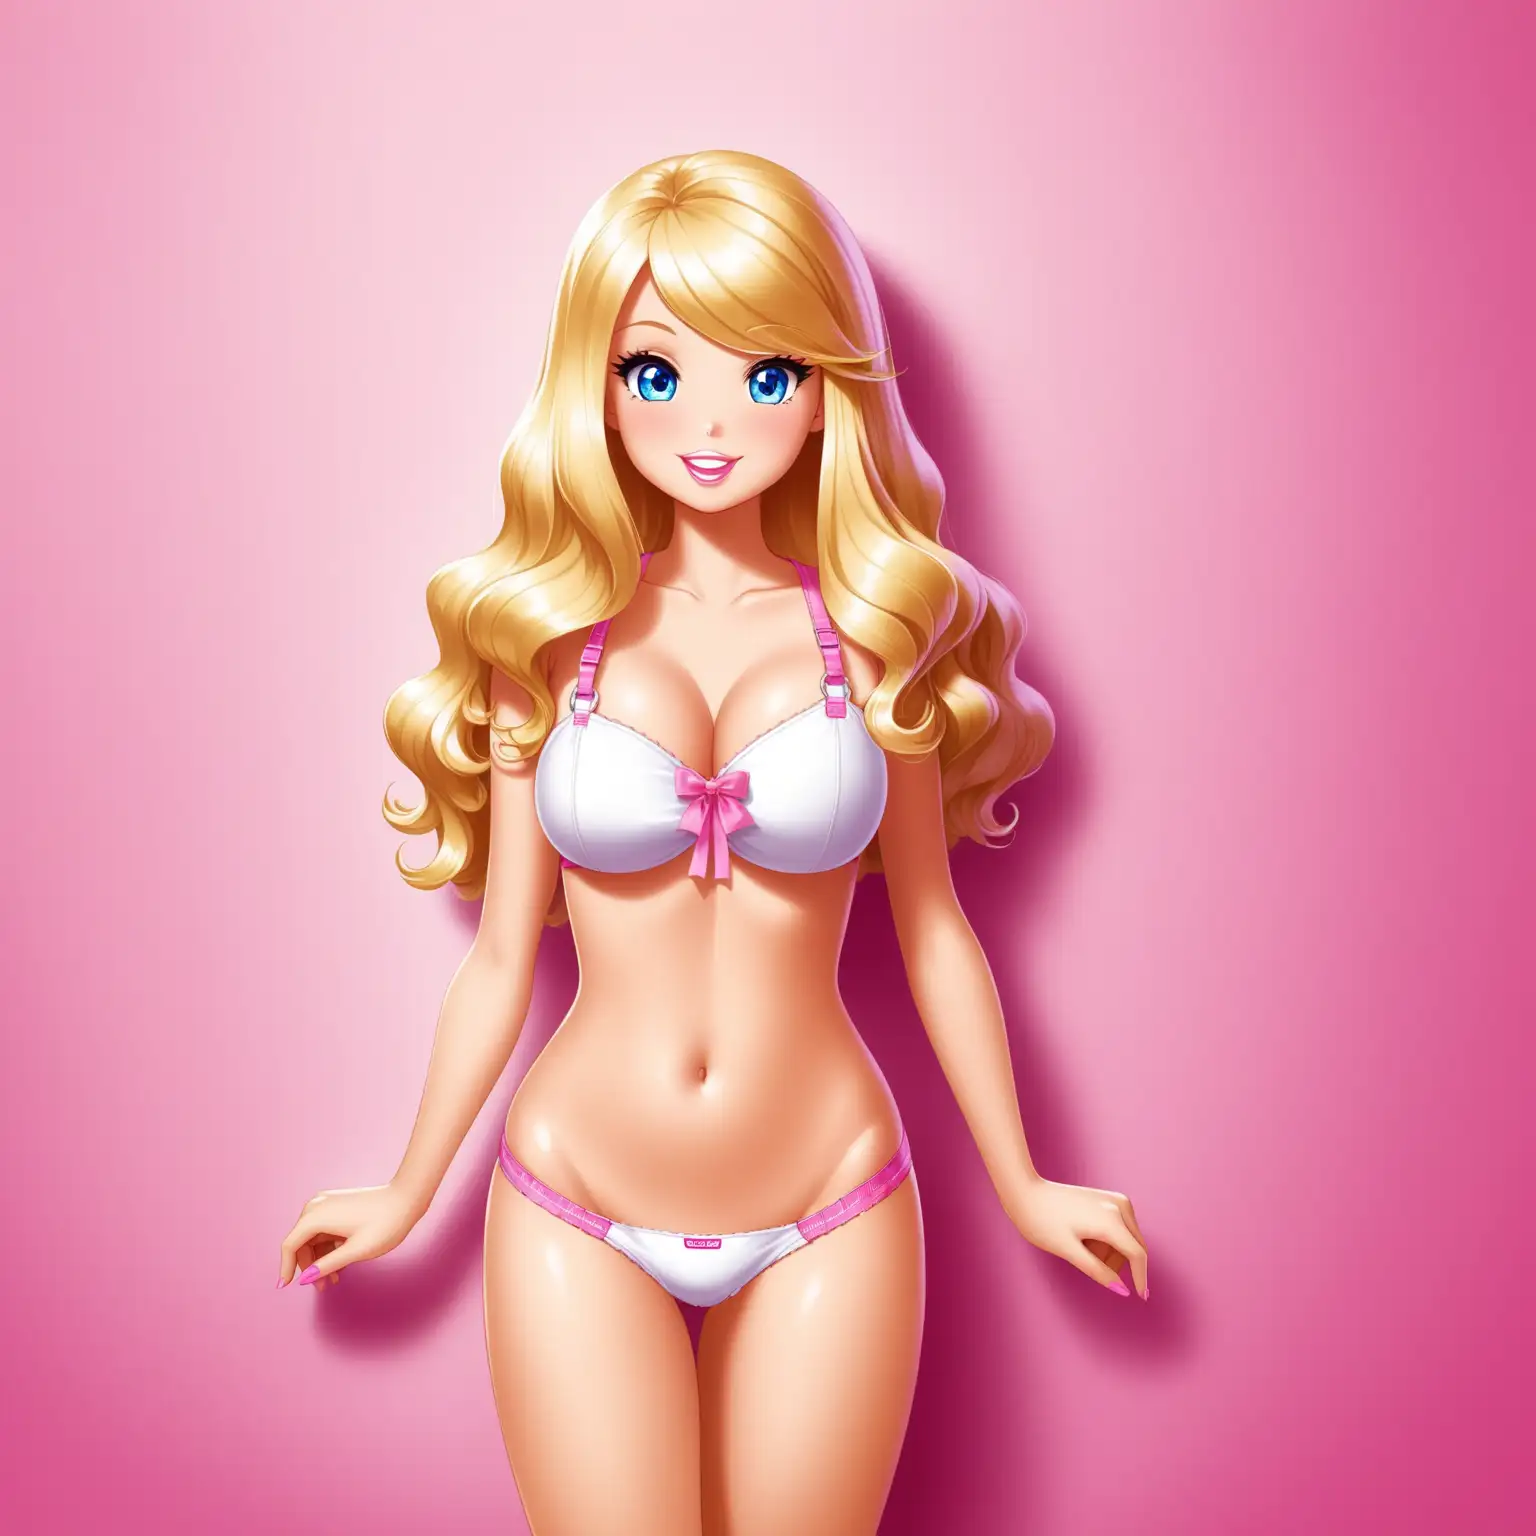 Stacie from Barbie 15 years old, measuring 150 cm and weighing 35 kg mince, yeux bleus, cheveux blonds longs ondulés, seins C cup, appuyé contre le mur